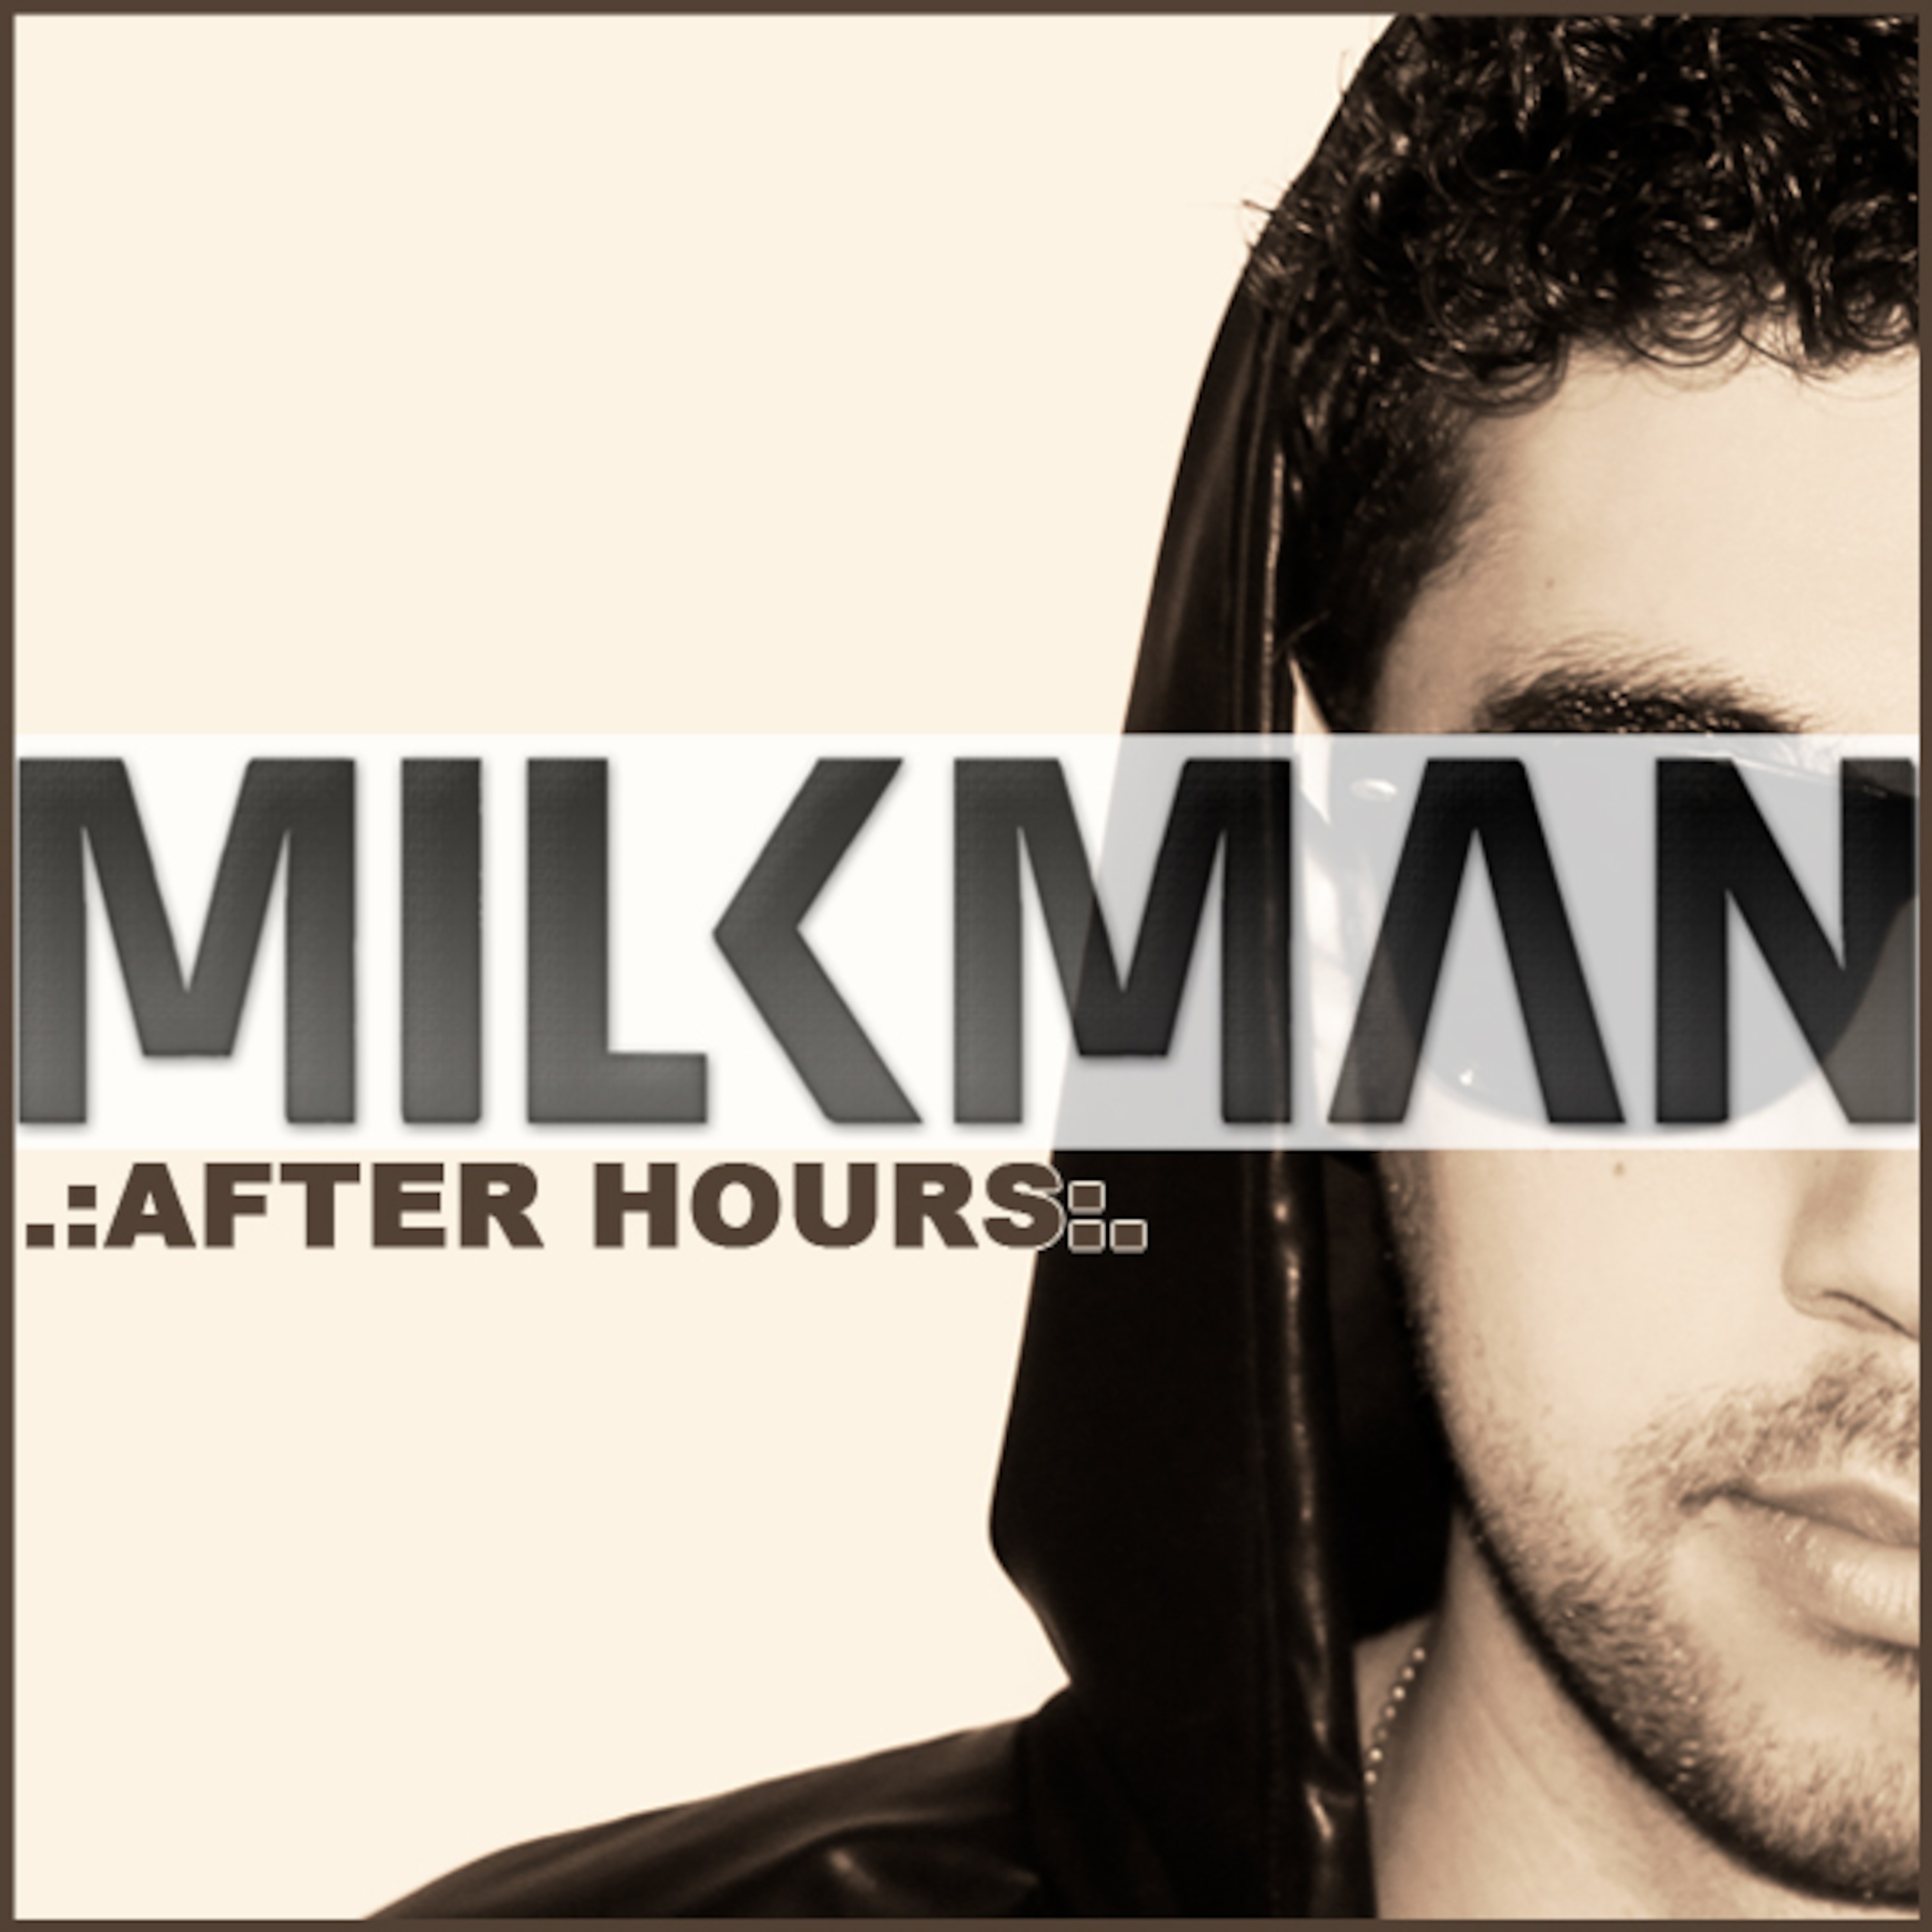 Milkman's After Hours